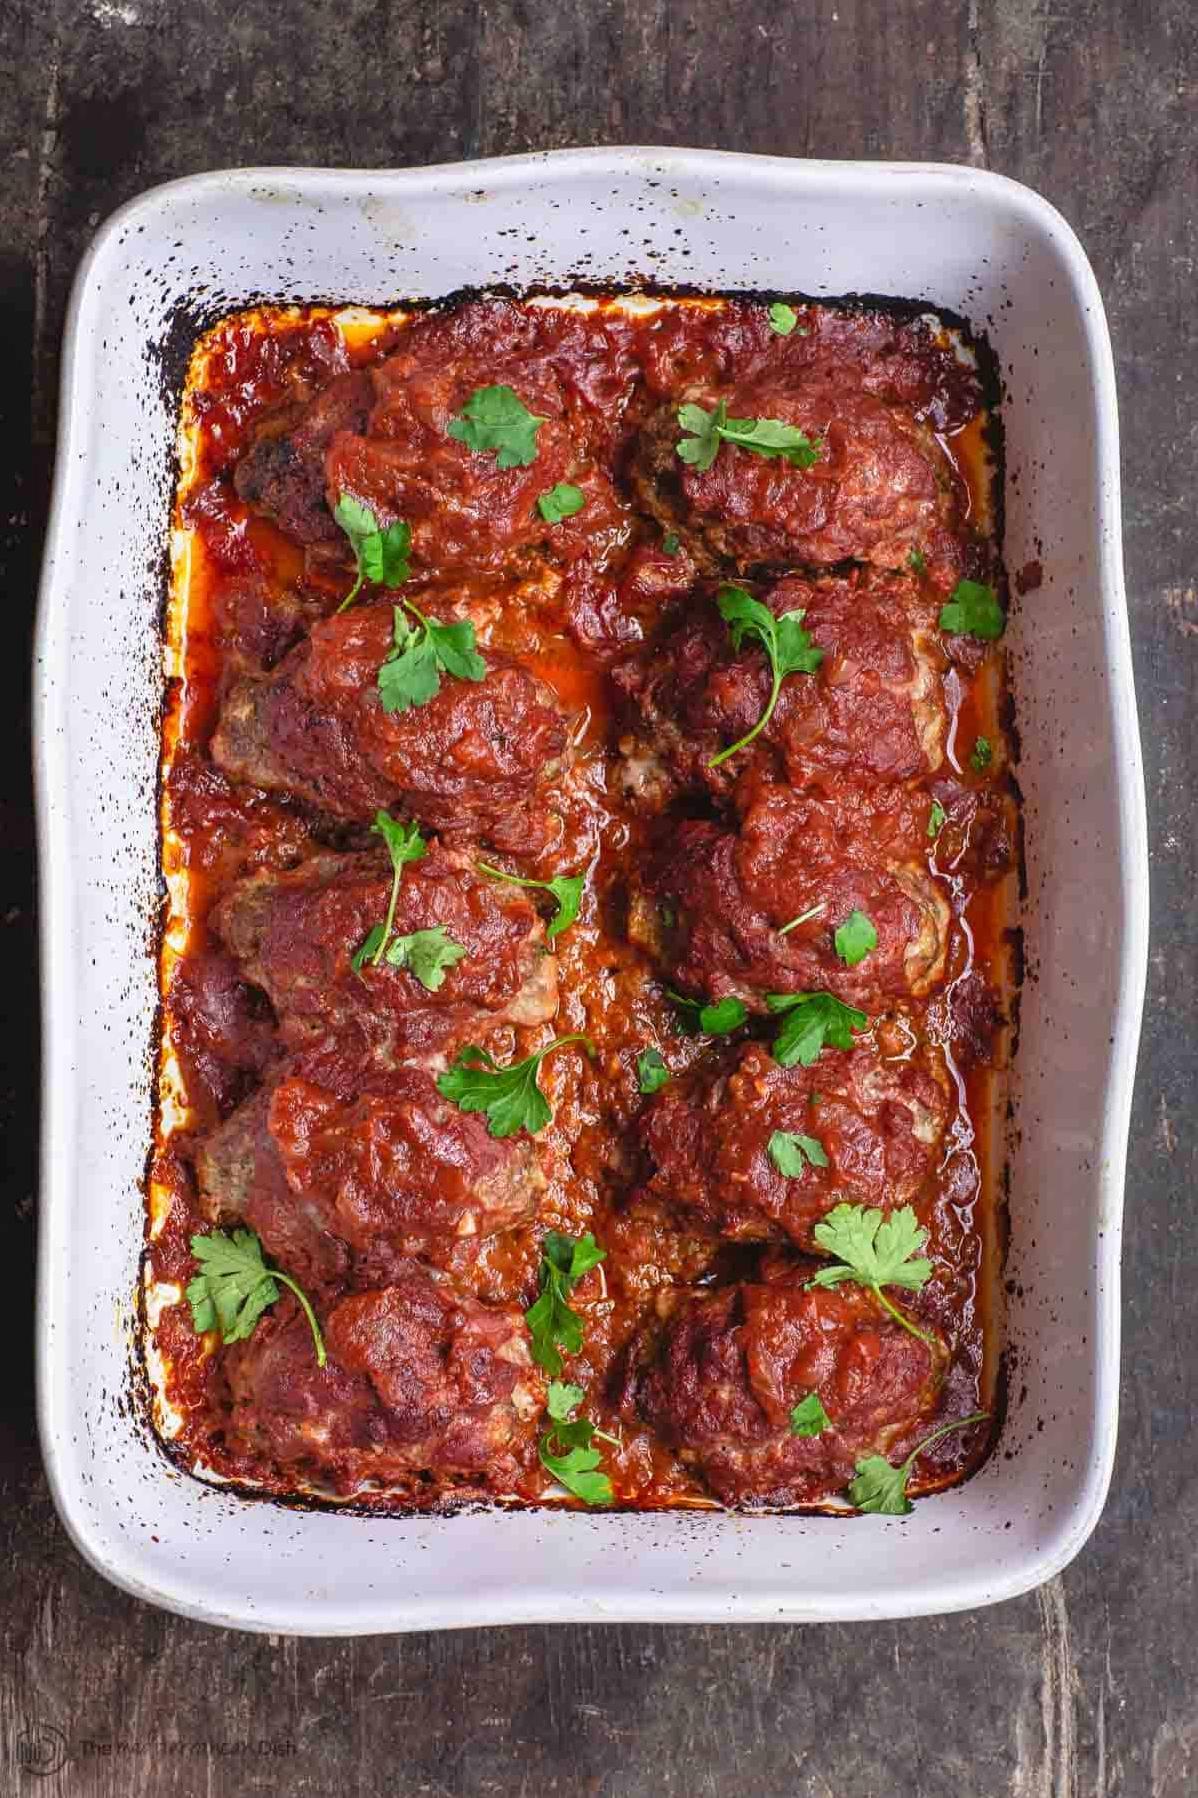  A mouthwatering dream come true: tender meatballs soaking up a rich wine sauce!